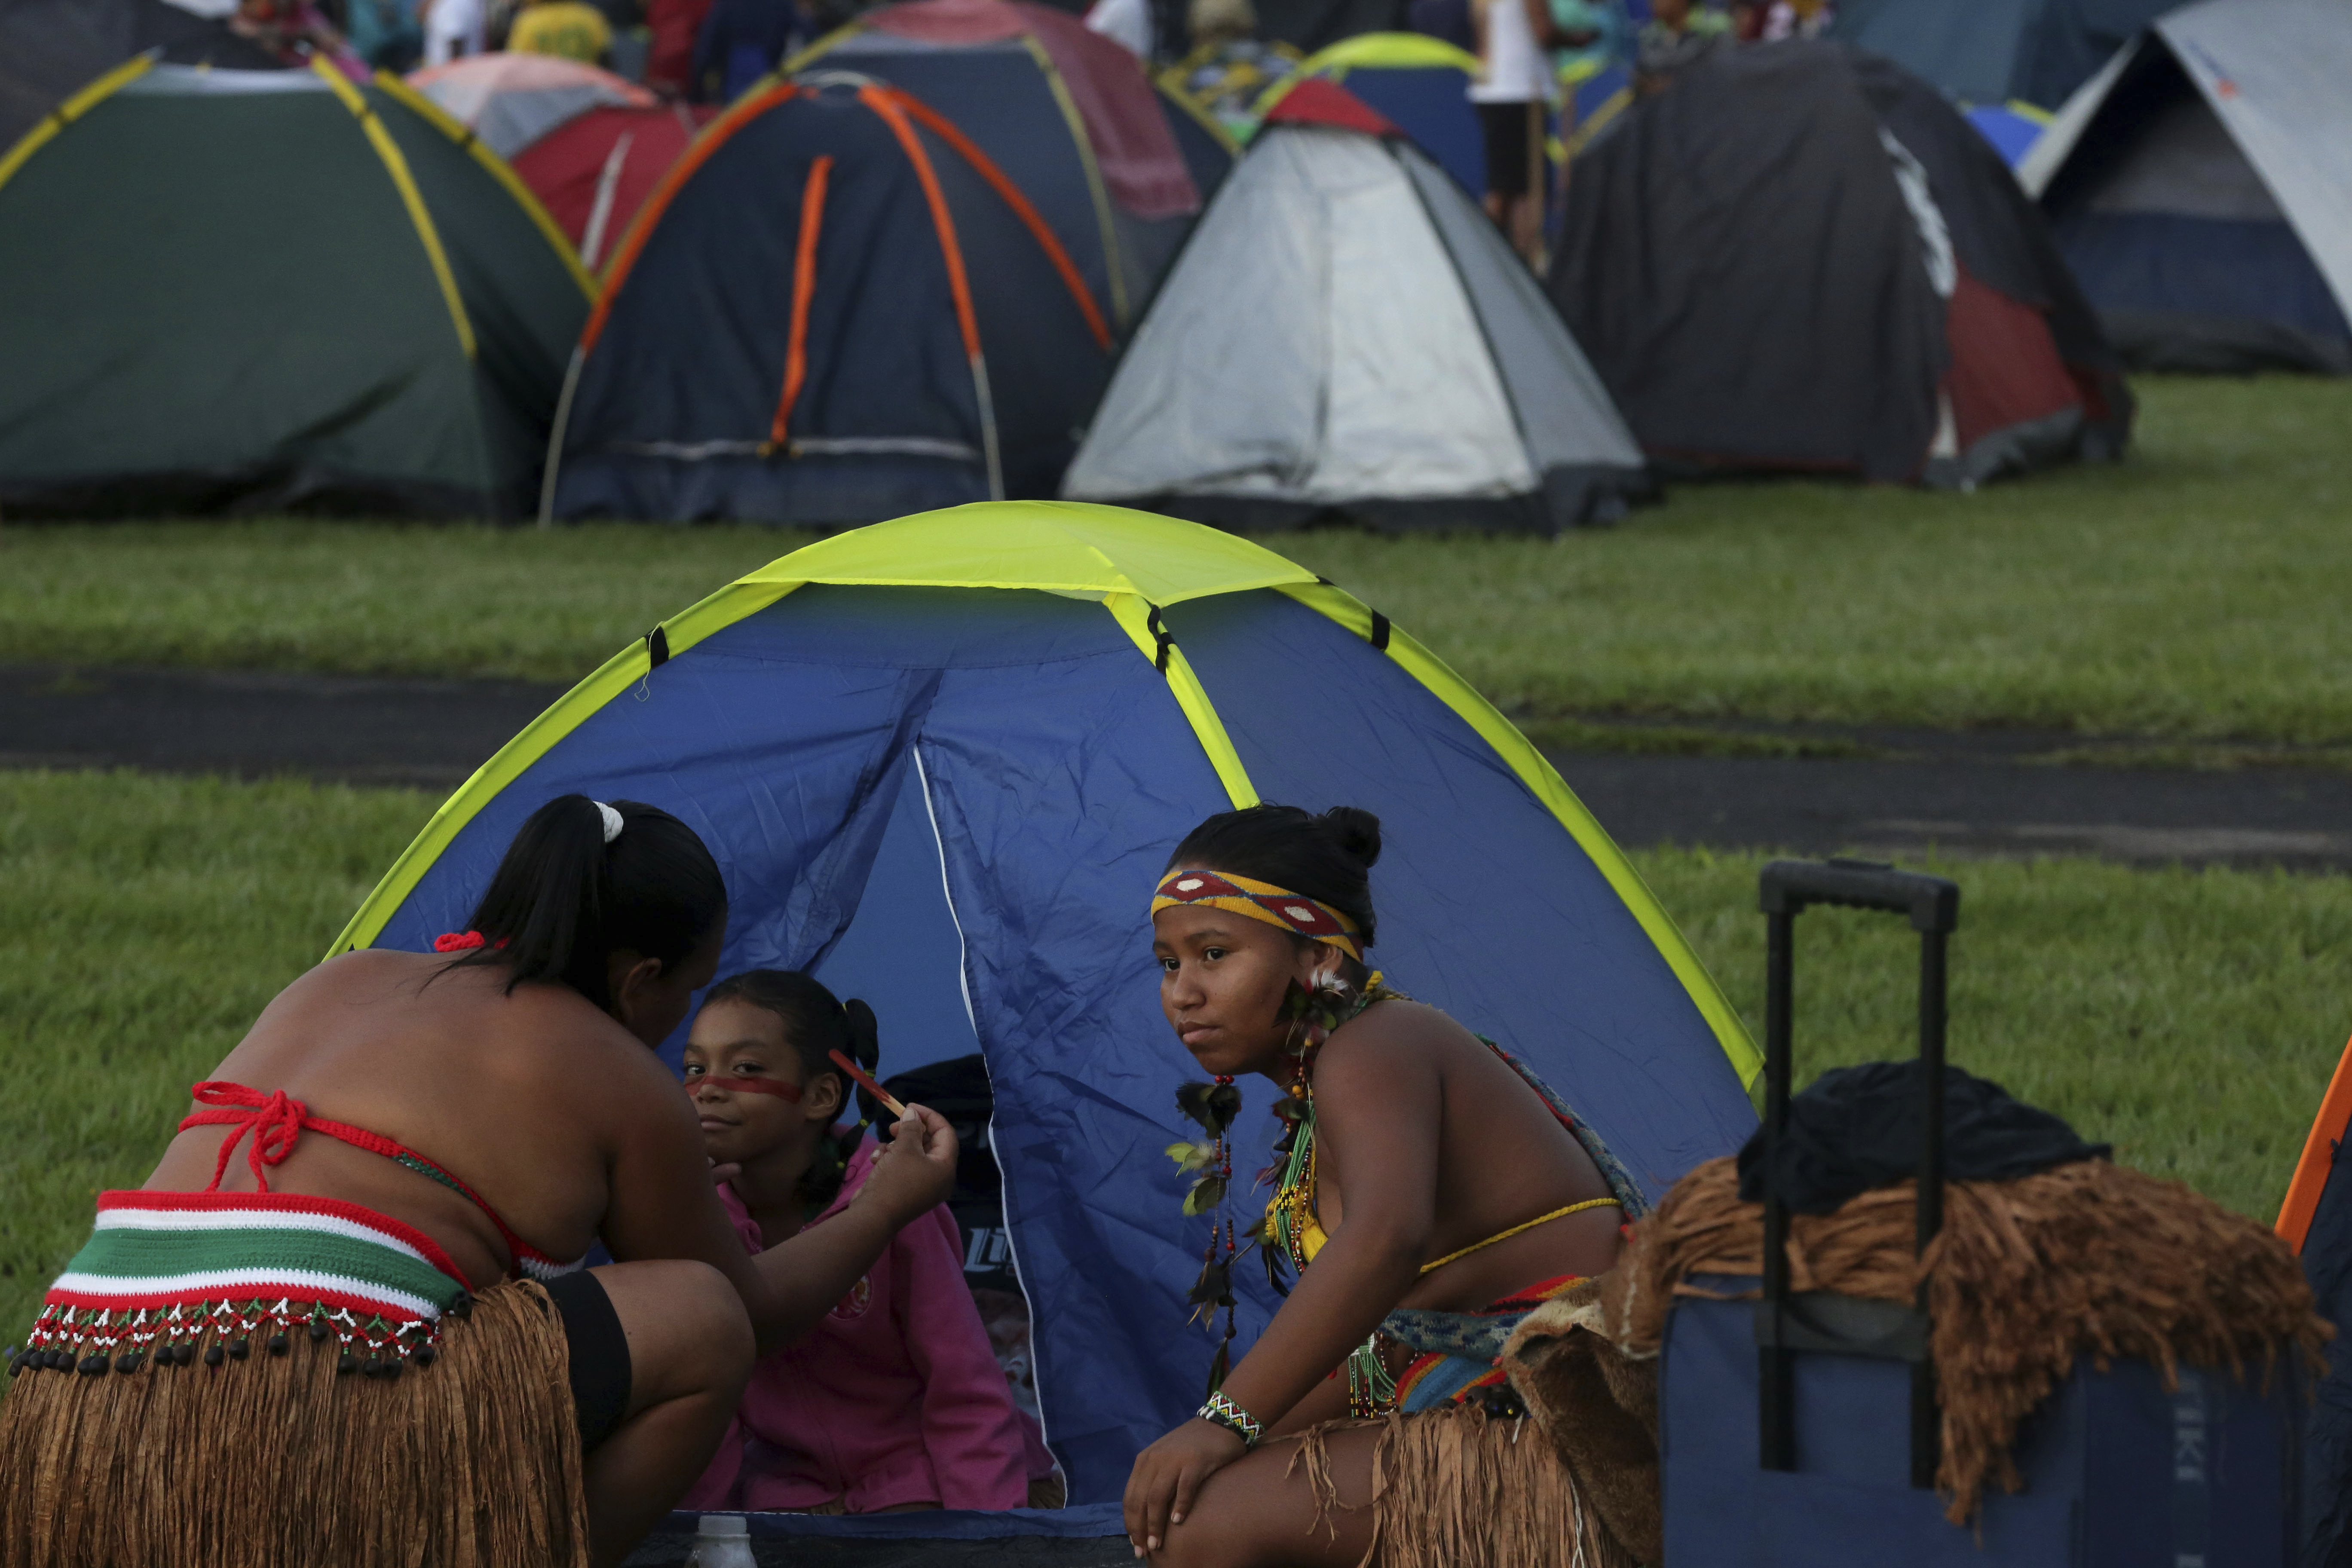 An indigenous mother applies body paint on her daughter during an annual three-day campout protest known as the Free Land Encampment, in Brasilia, Brazil, Wednesday, April 24, 2019. The event begins amid animosity between Brazil’s indigenous groups and the new government of far-right President Jair Bolsonaro. (AP Photo/Eraldo Peres)